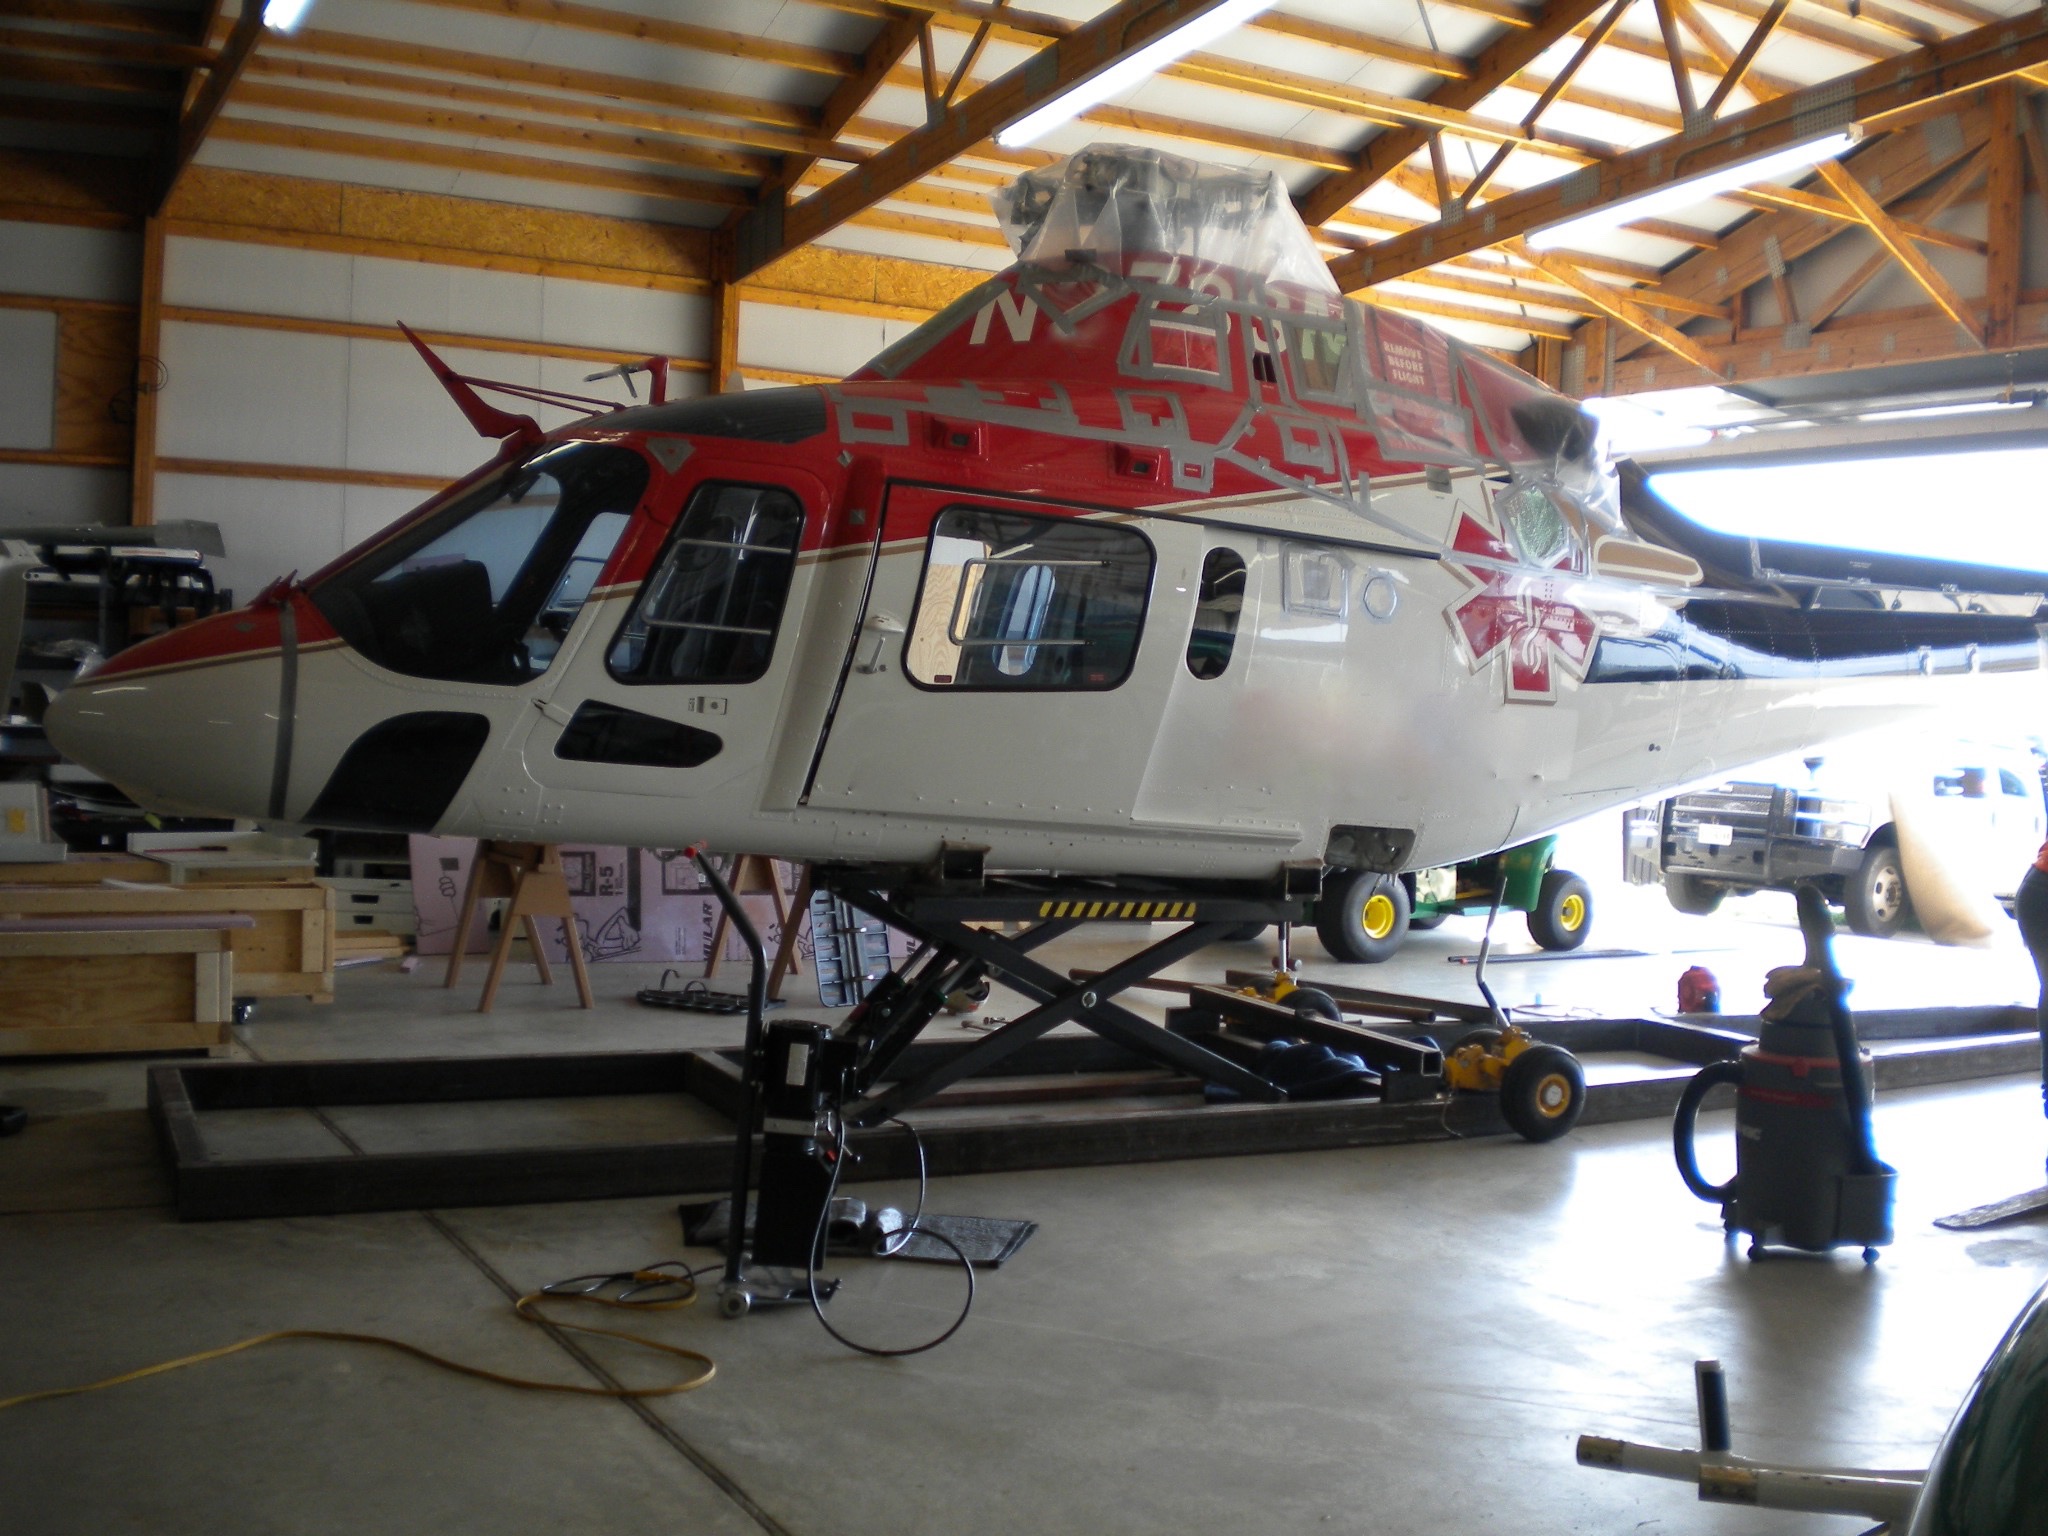 The device consists of a frame with a lifting device hydraulically operated and electrically controlled that can be used on several helicopter models.